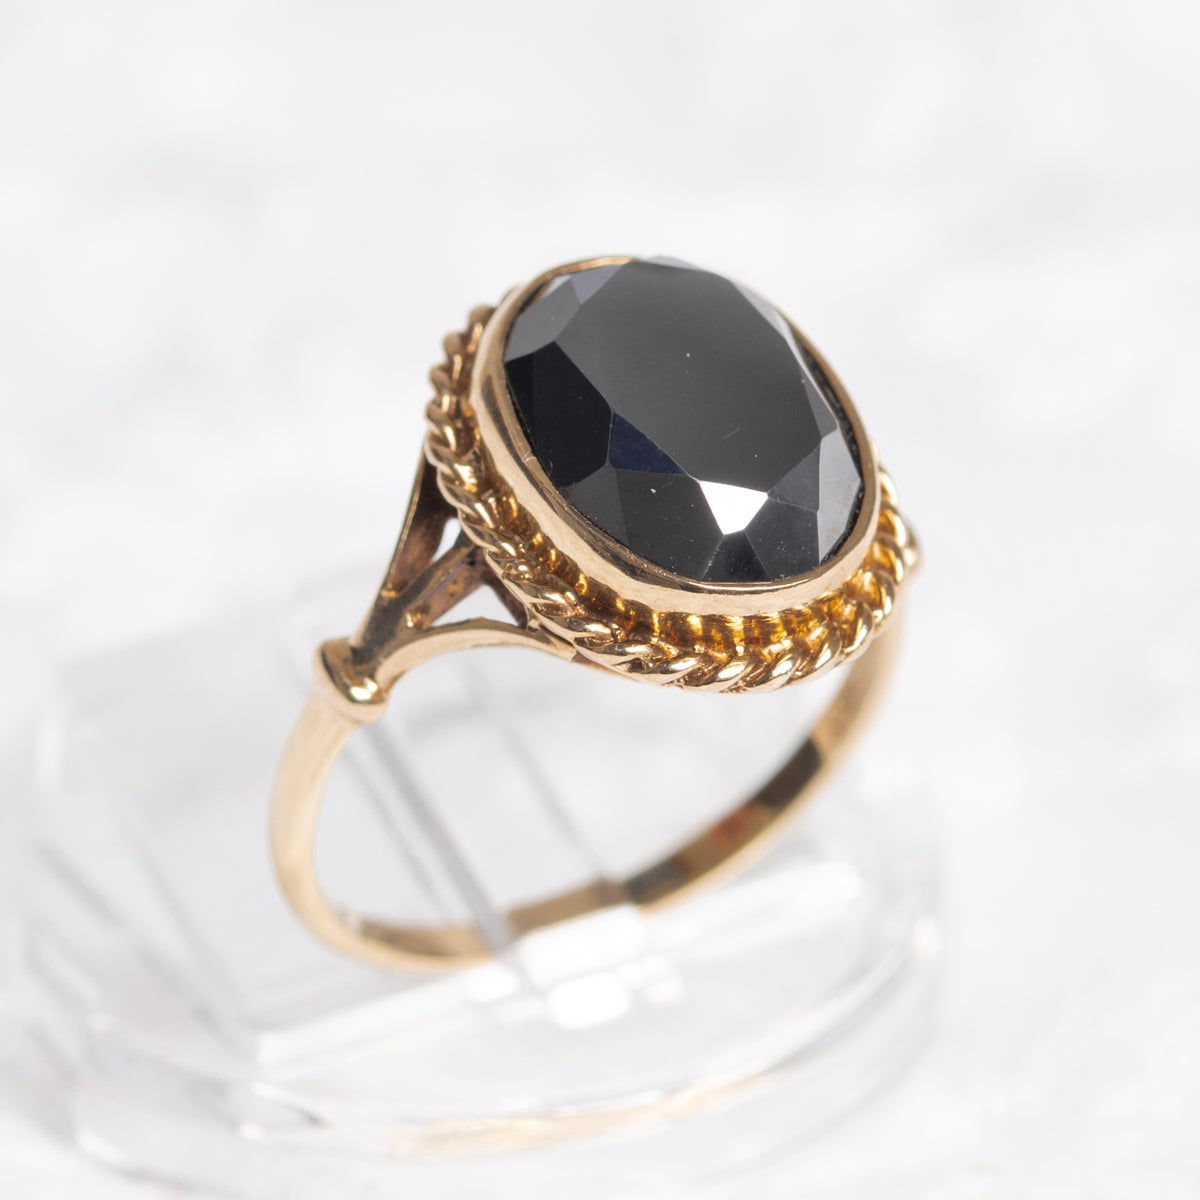 Vintage 9ct Gold Gemstone Ring Oval Facet Cut Hematite 1960's UK Size M (A1429)